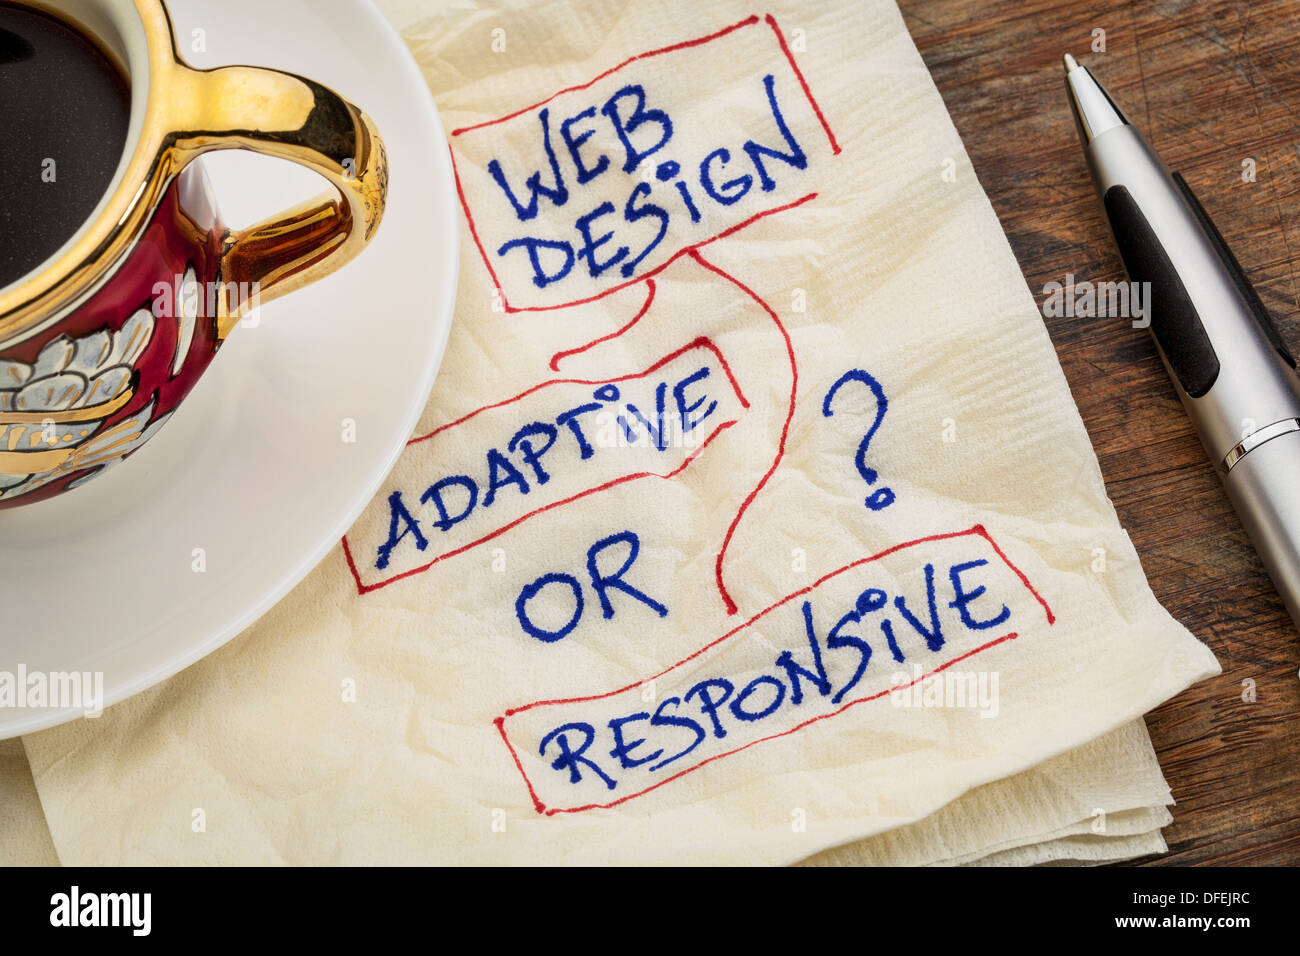 adaptive or responsive web design choice - a napkin doodle with a cup of espresso coffee Stock Photo